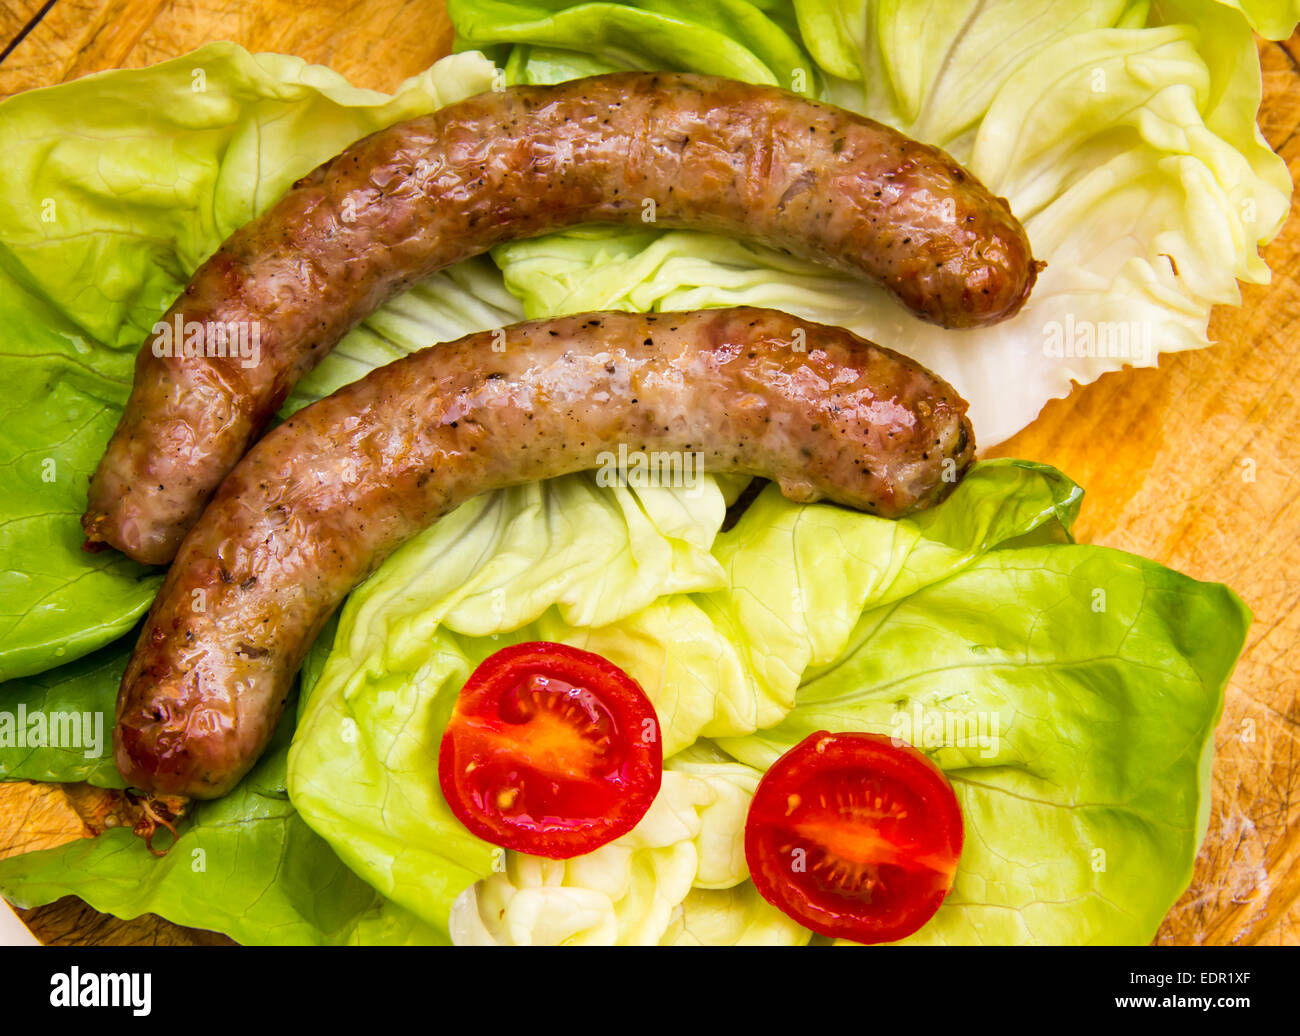 Sausage on wooden cutting board with salad top view Stock Photo